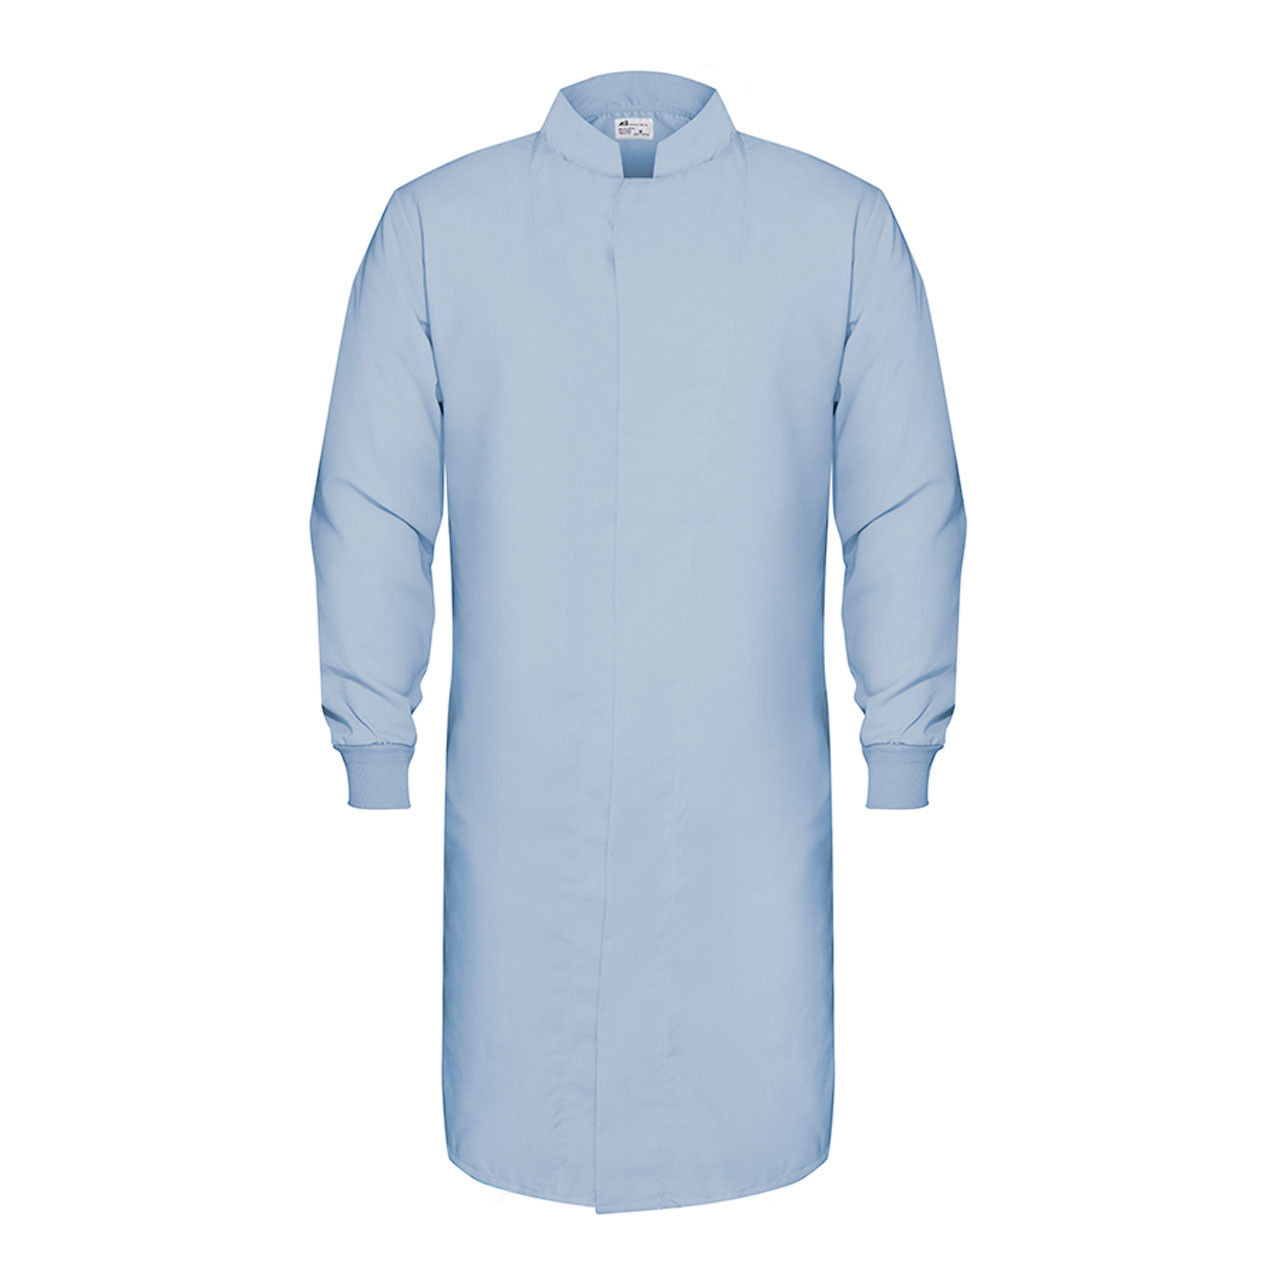 HACCP Knit Cuff Lab Coat, Wedgewood Blue Questions & Answers